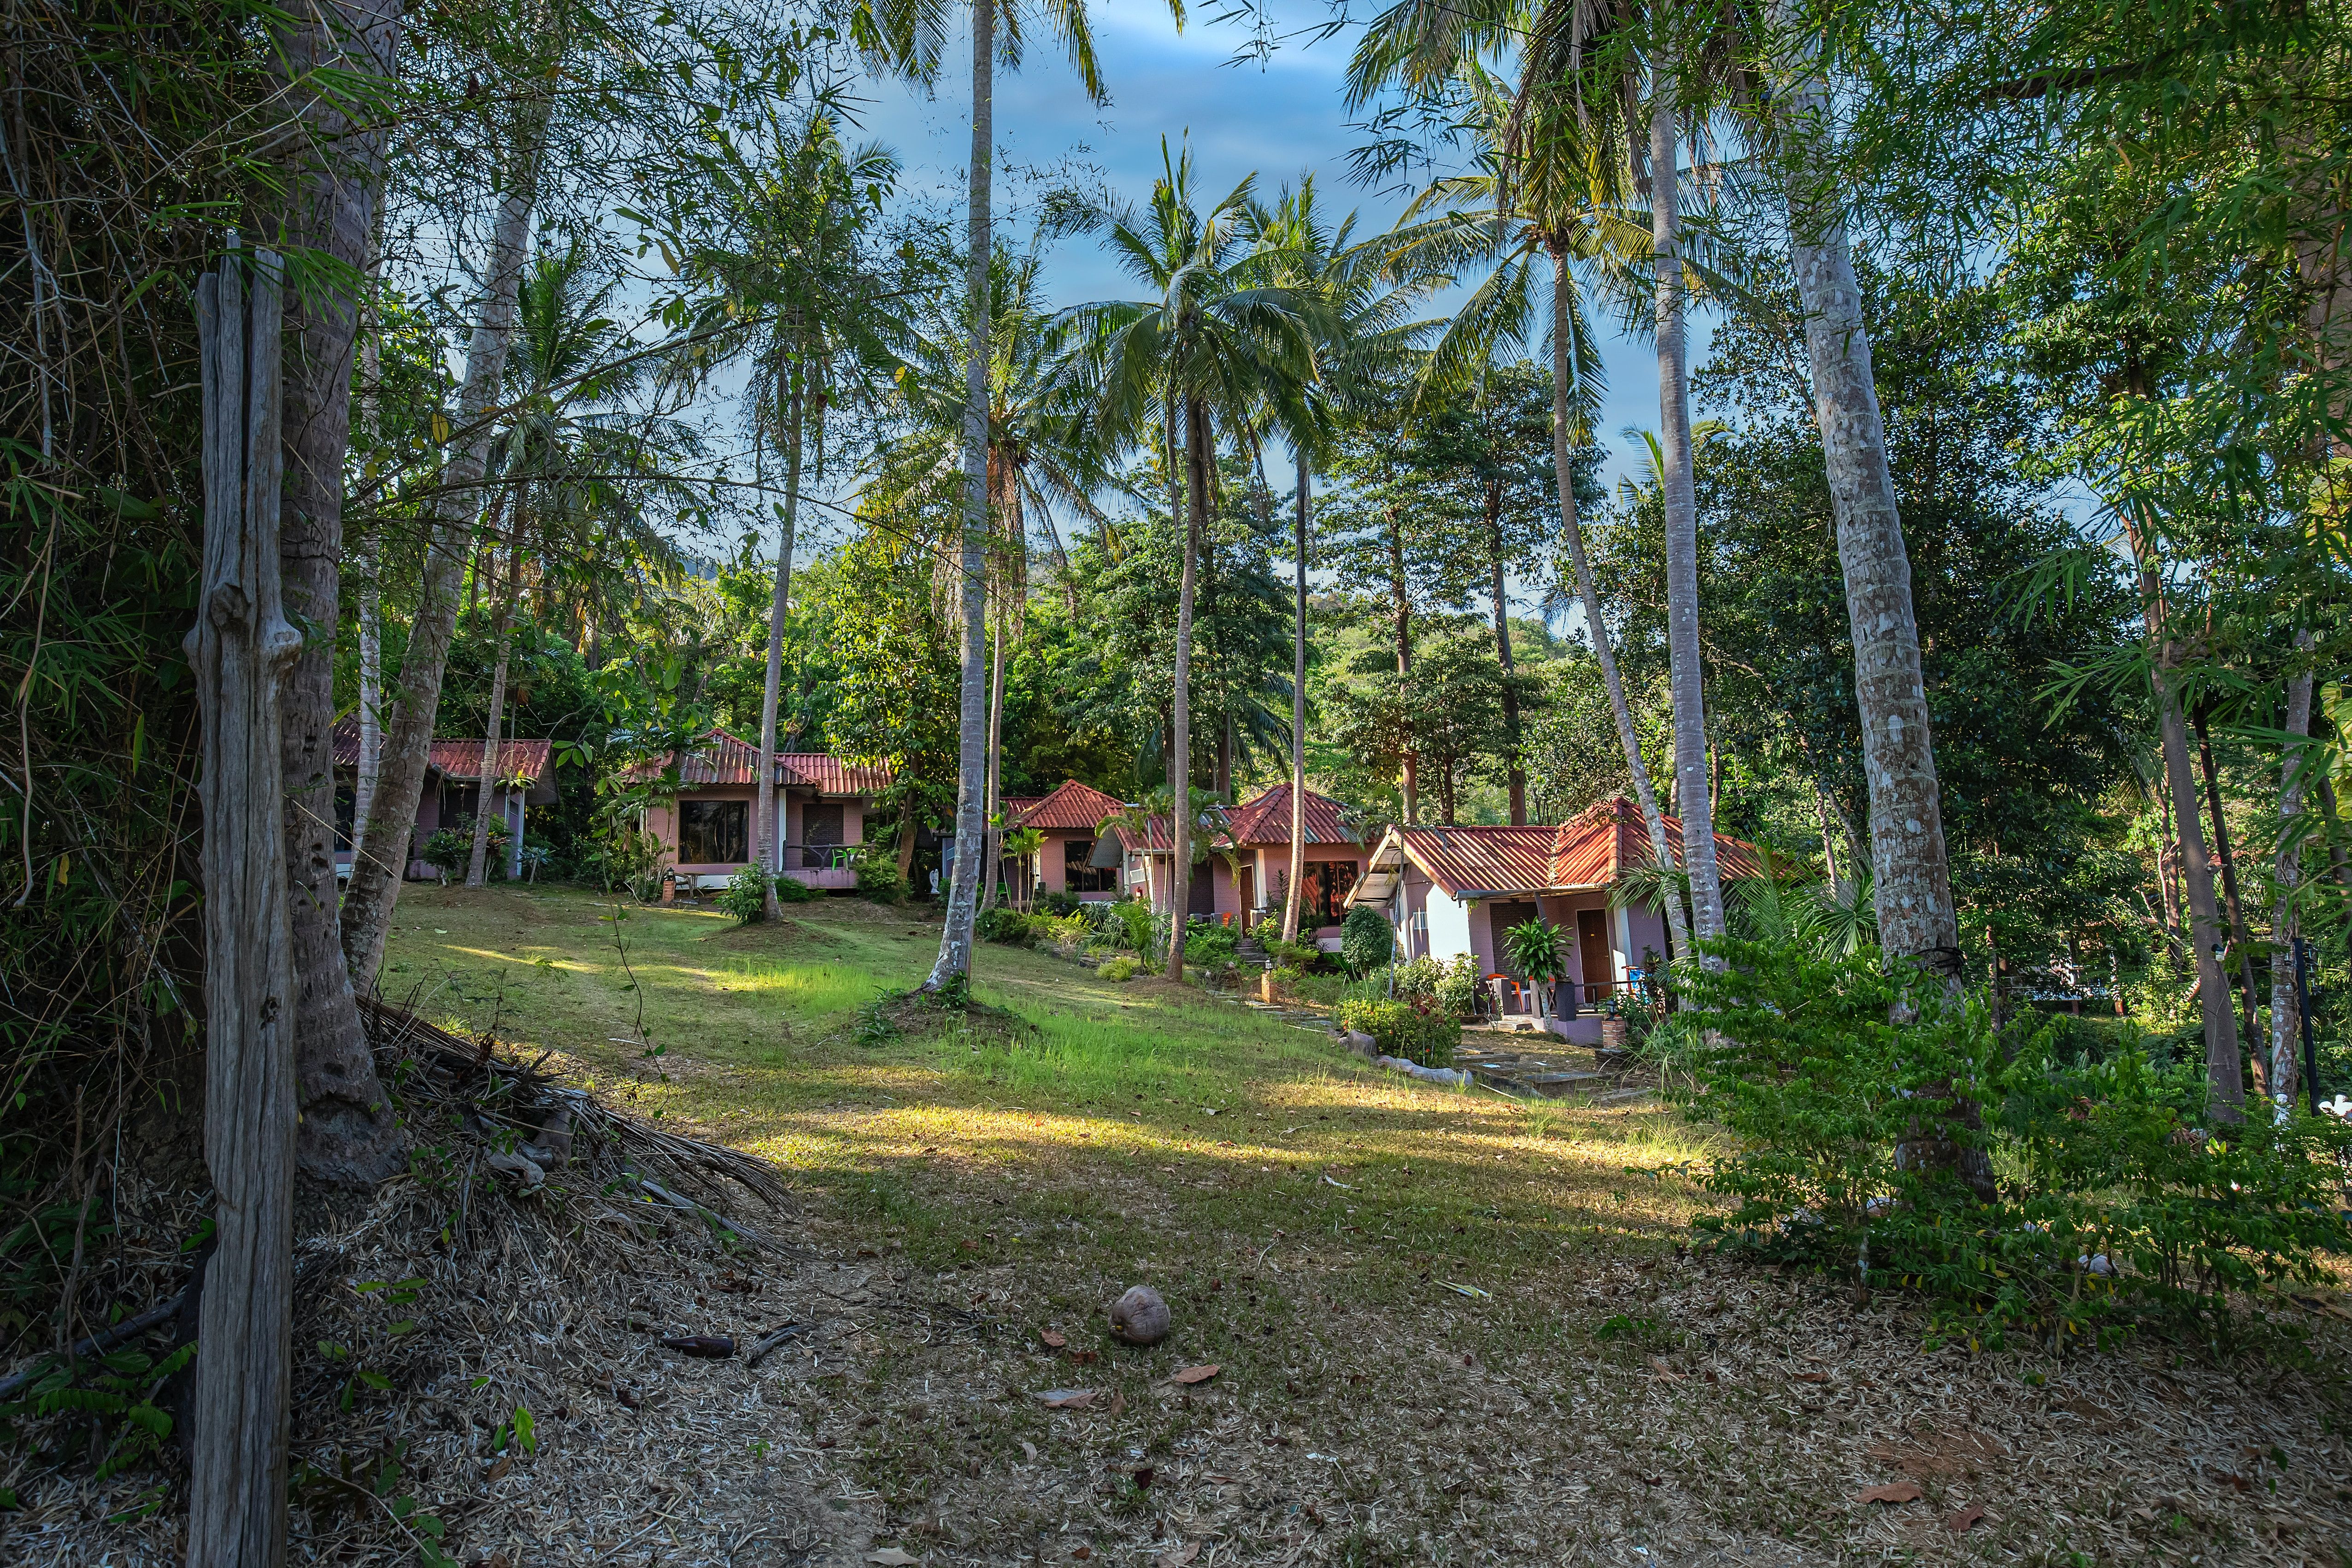 The house sits behind some trees on a sunny day in the Thai islands.